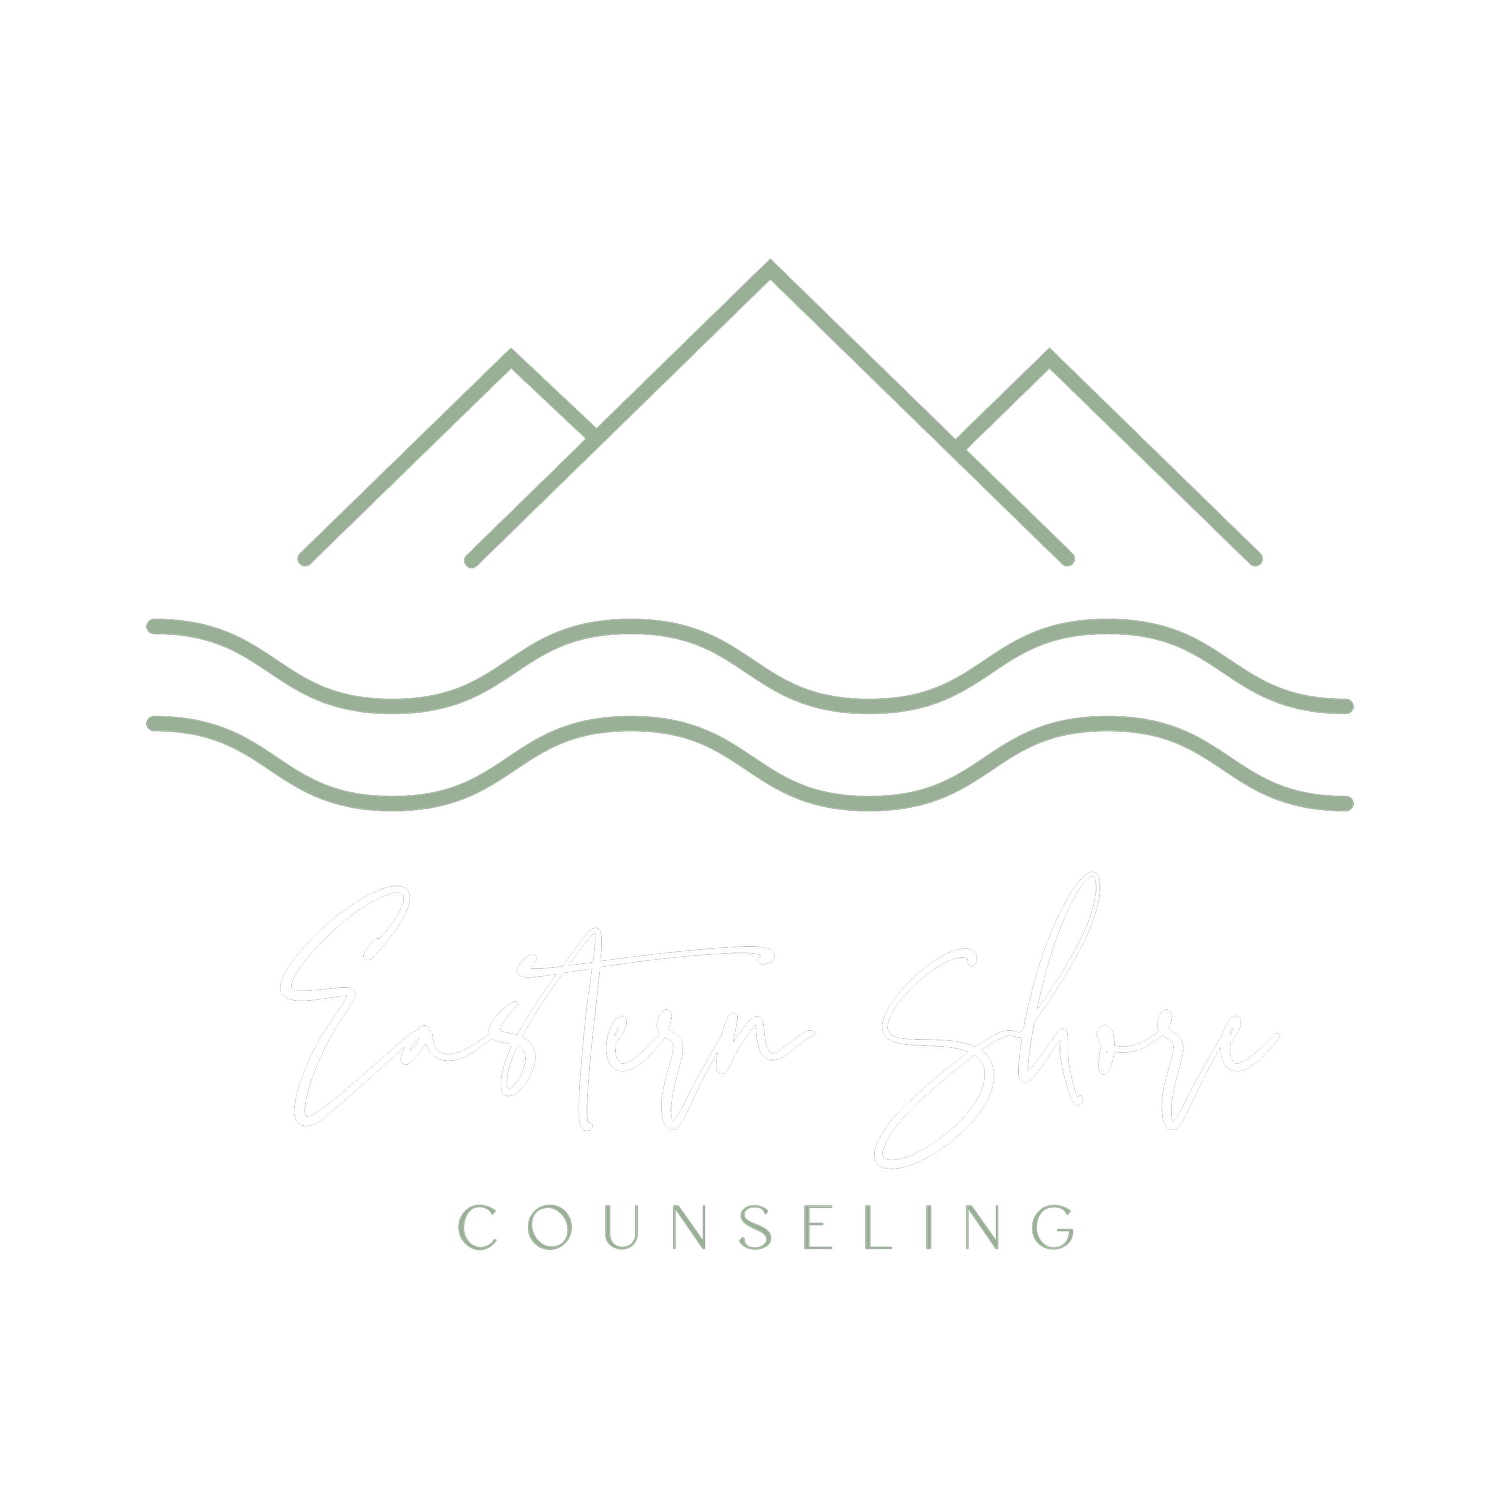 Eastern Shore Counseling - Therapy in Portland, Maine